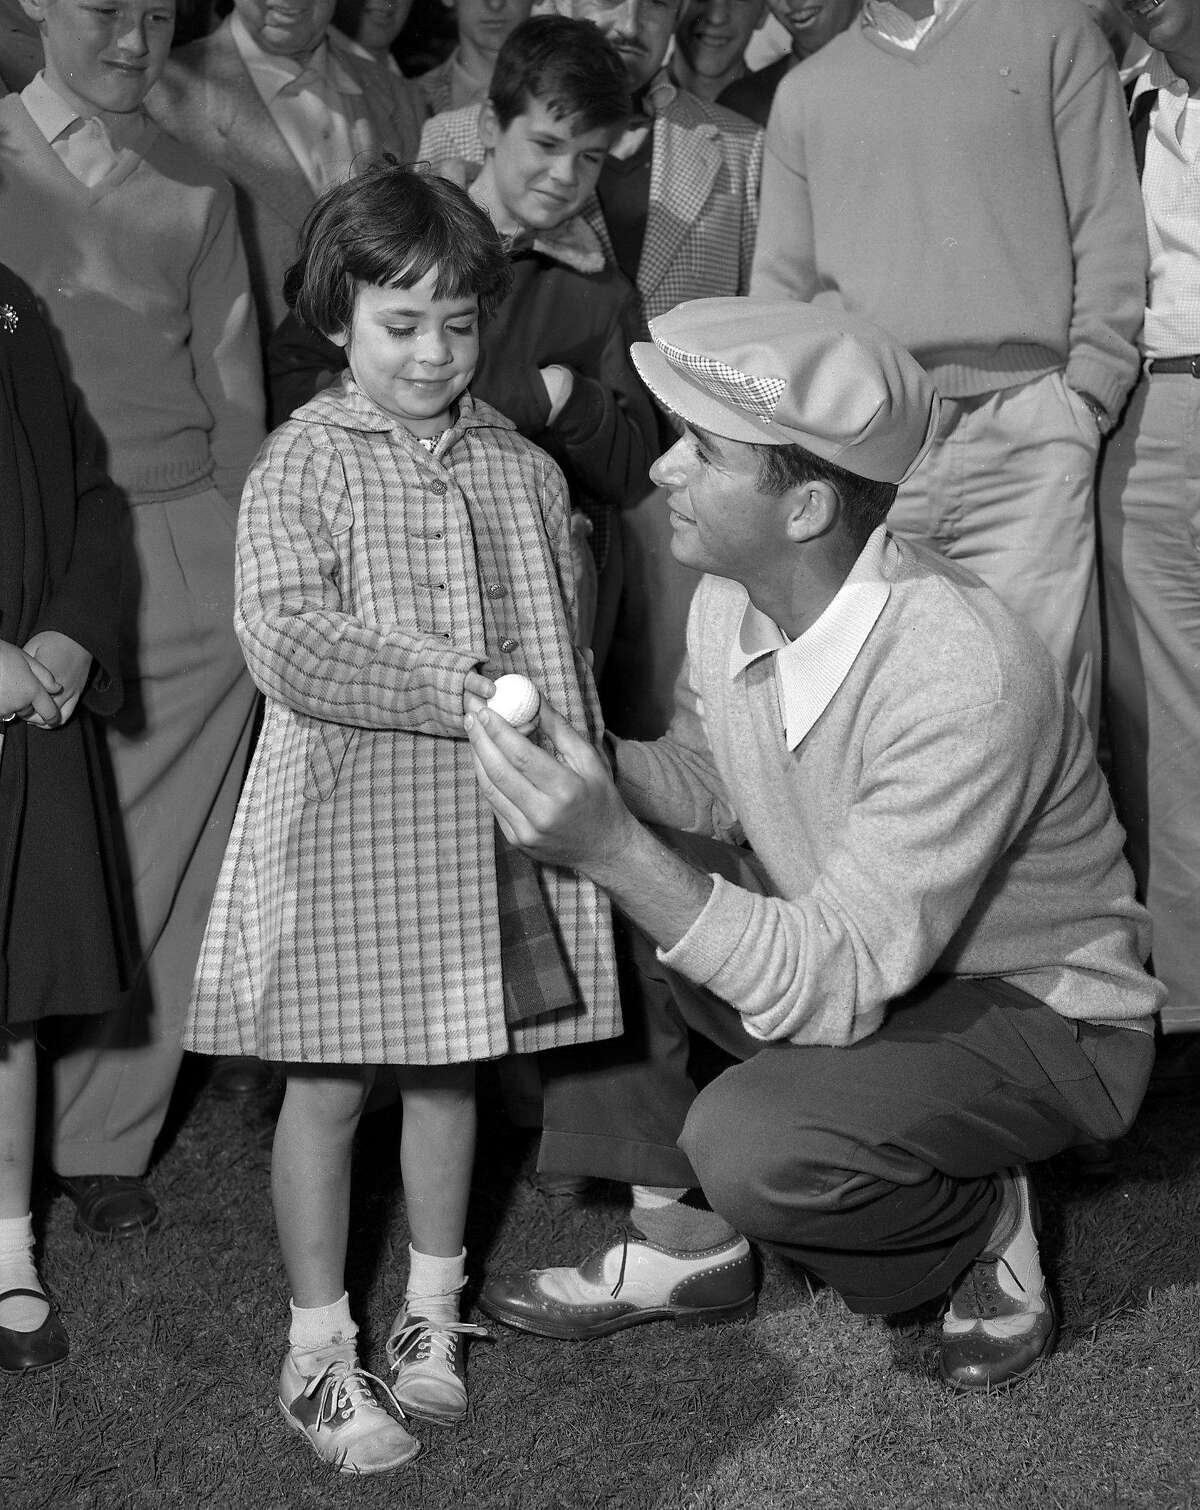 Ken Venturi would beat Art Linhares in the 1953 San Francisco City Golf Championships Venturi would present the winning ball to Maureen Powell ( age 6) who was a big fan April 1953